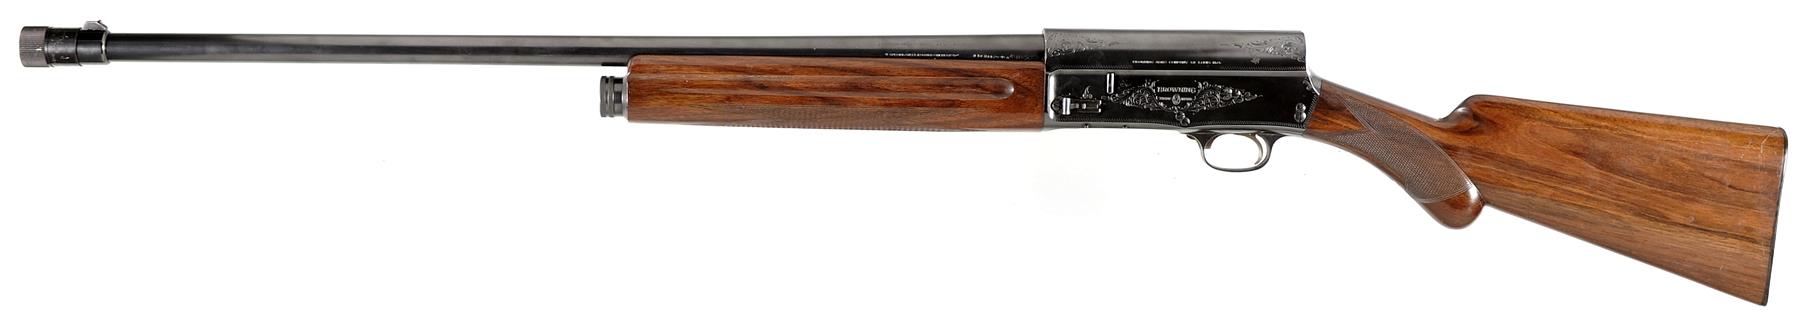 Left side view of the 1947 Belgian FN made Browning Auto 5 coming up for auction by Rock Island Auction on 26th May 2016. Lever adjacent to magazine is the magazine cut-off. (Picture courtesy Rock Island Auction).